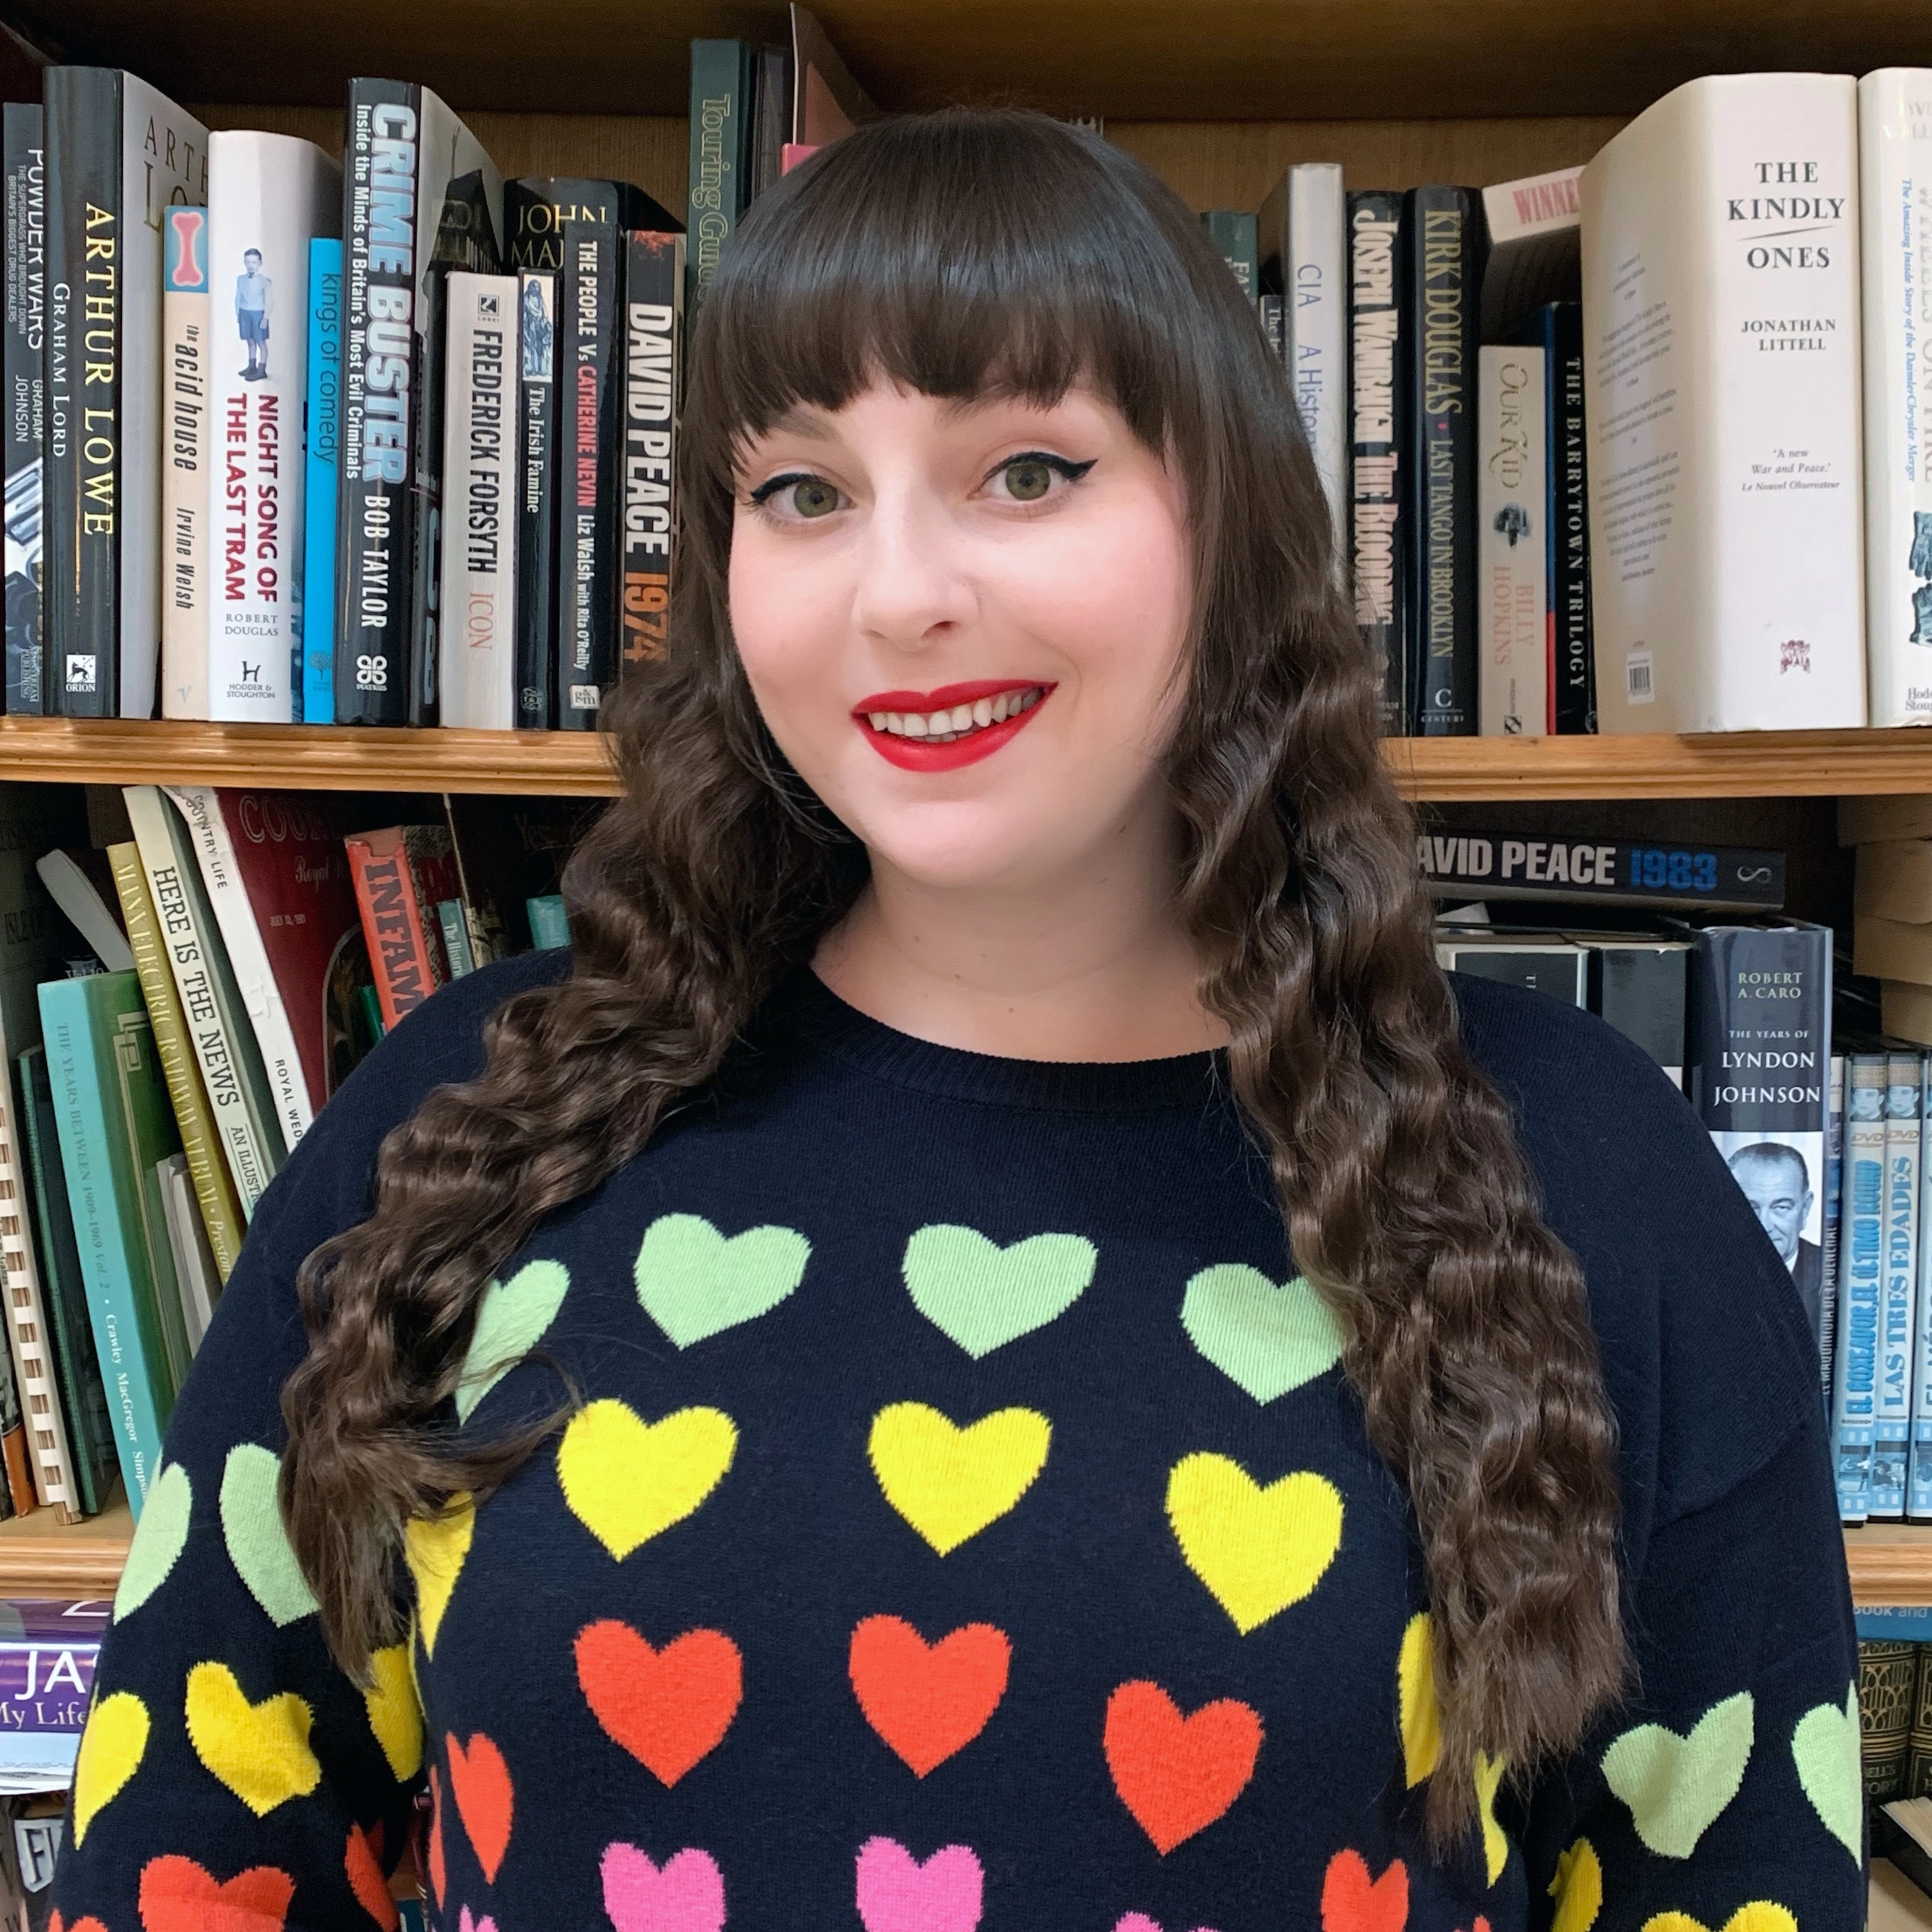 image shows a smiling woman with long brown hair. she is wearing red lipstick and her jumper has multicoloured hearts all over it.